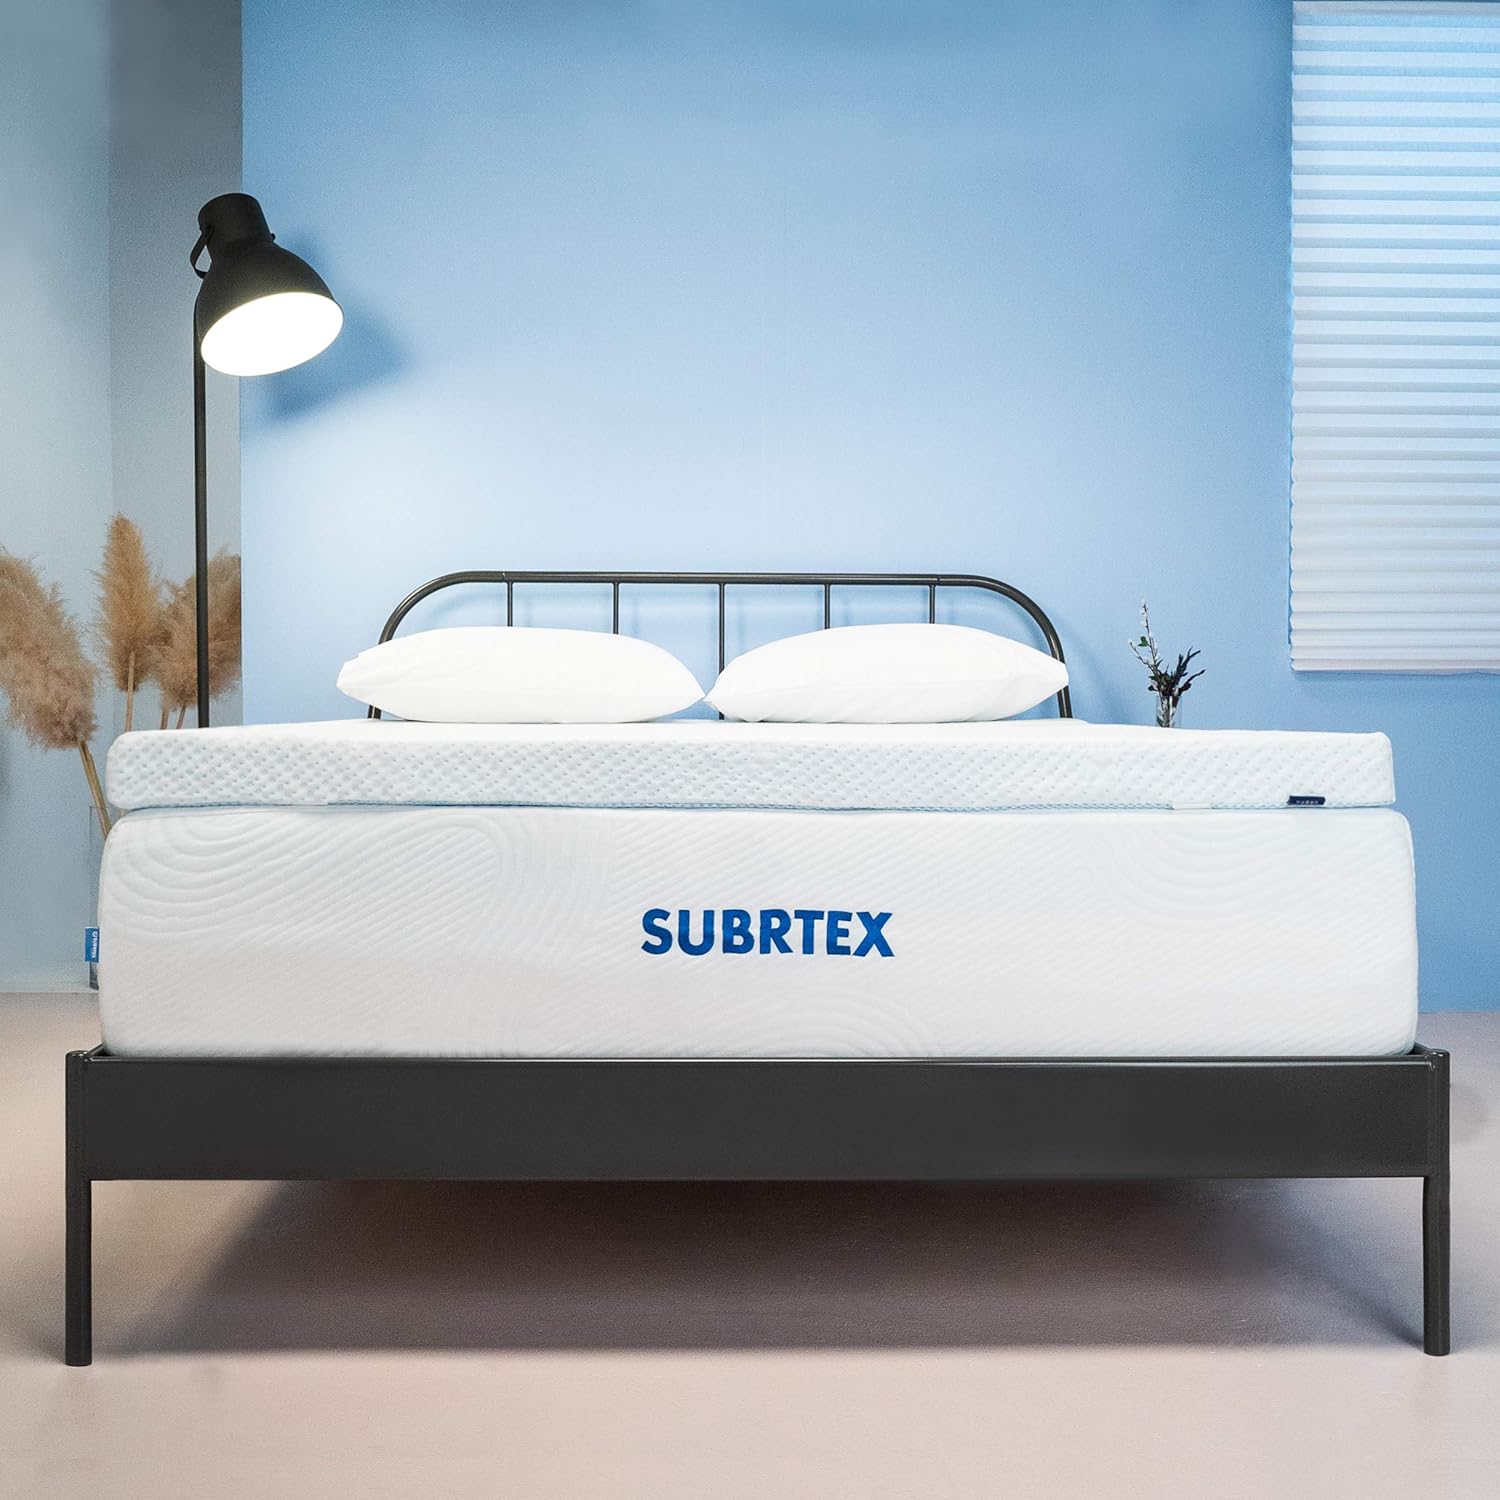 Subrtex 3 Inch Covered Gel-Infused Memory Foam Bed Mattress Topper High Density Cooling Removable Fitted Cover Ventilated Design